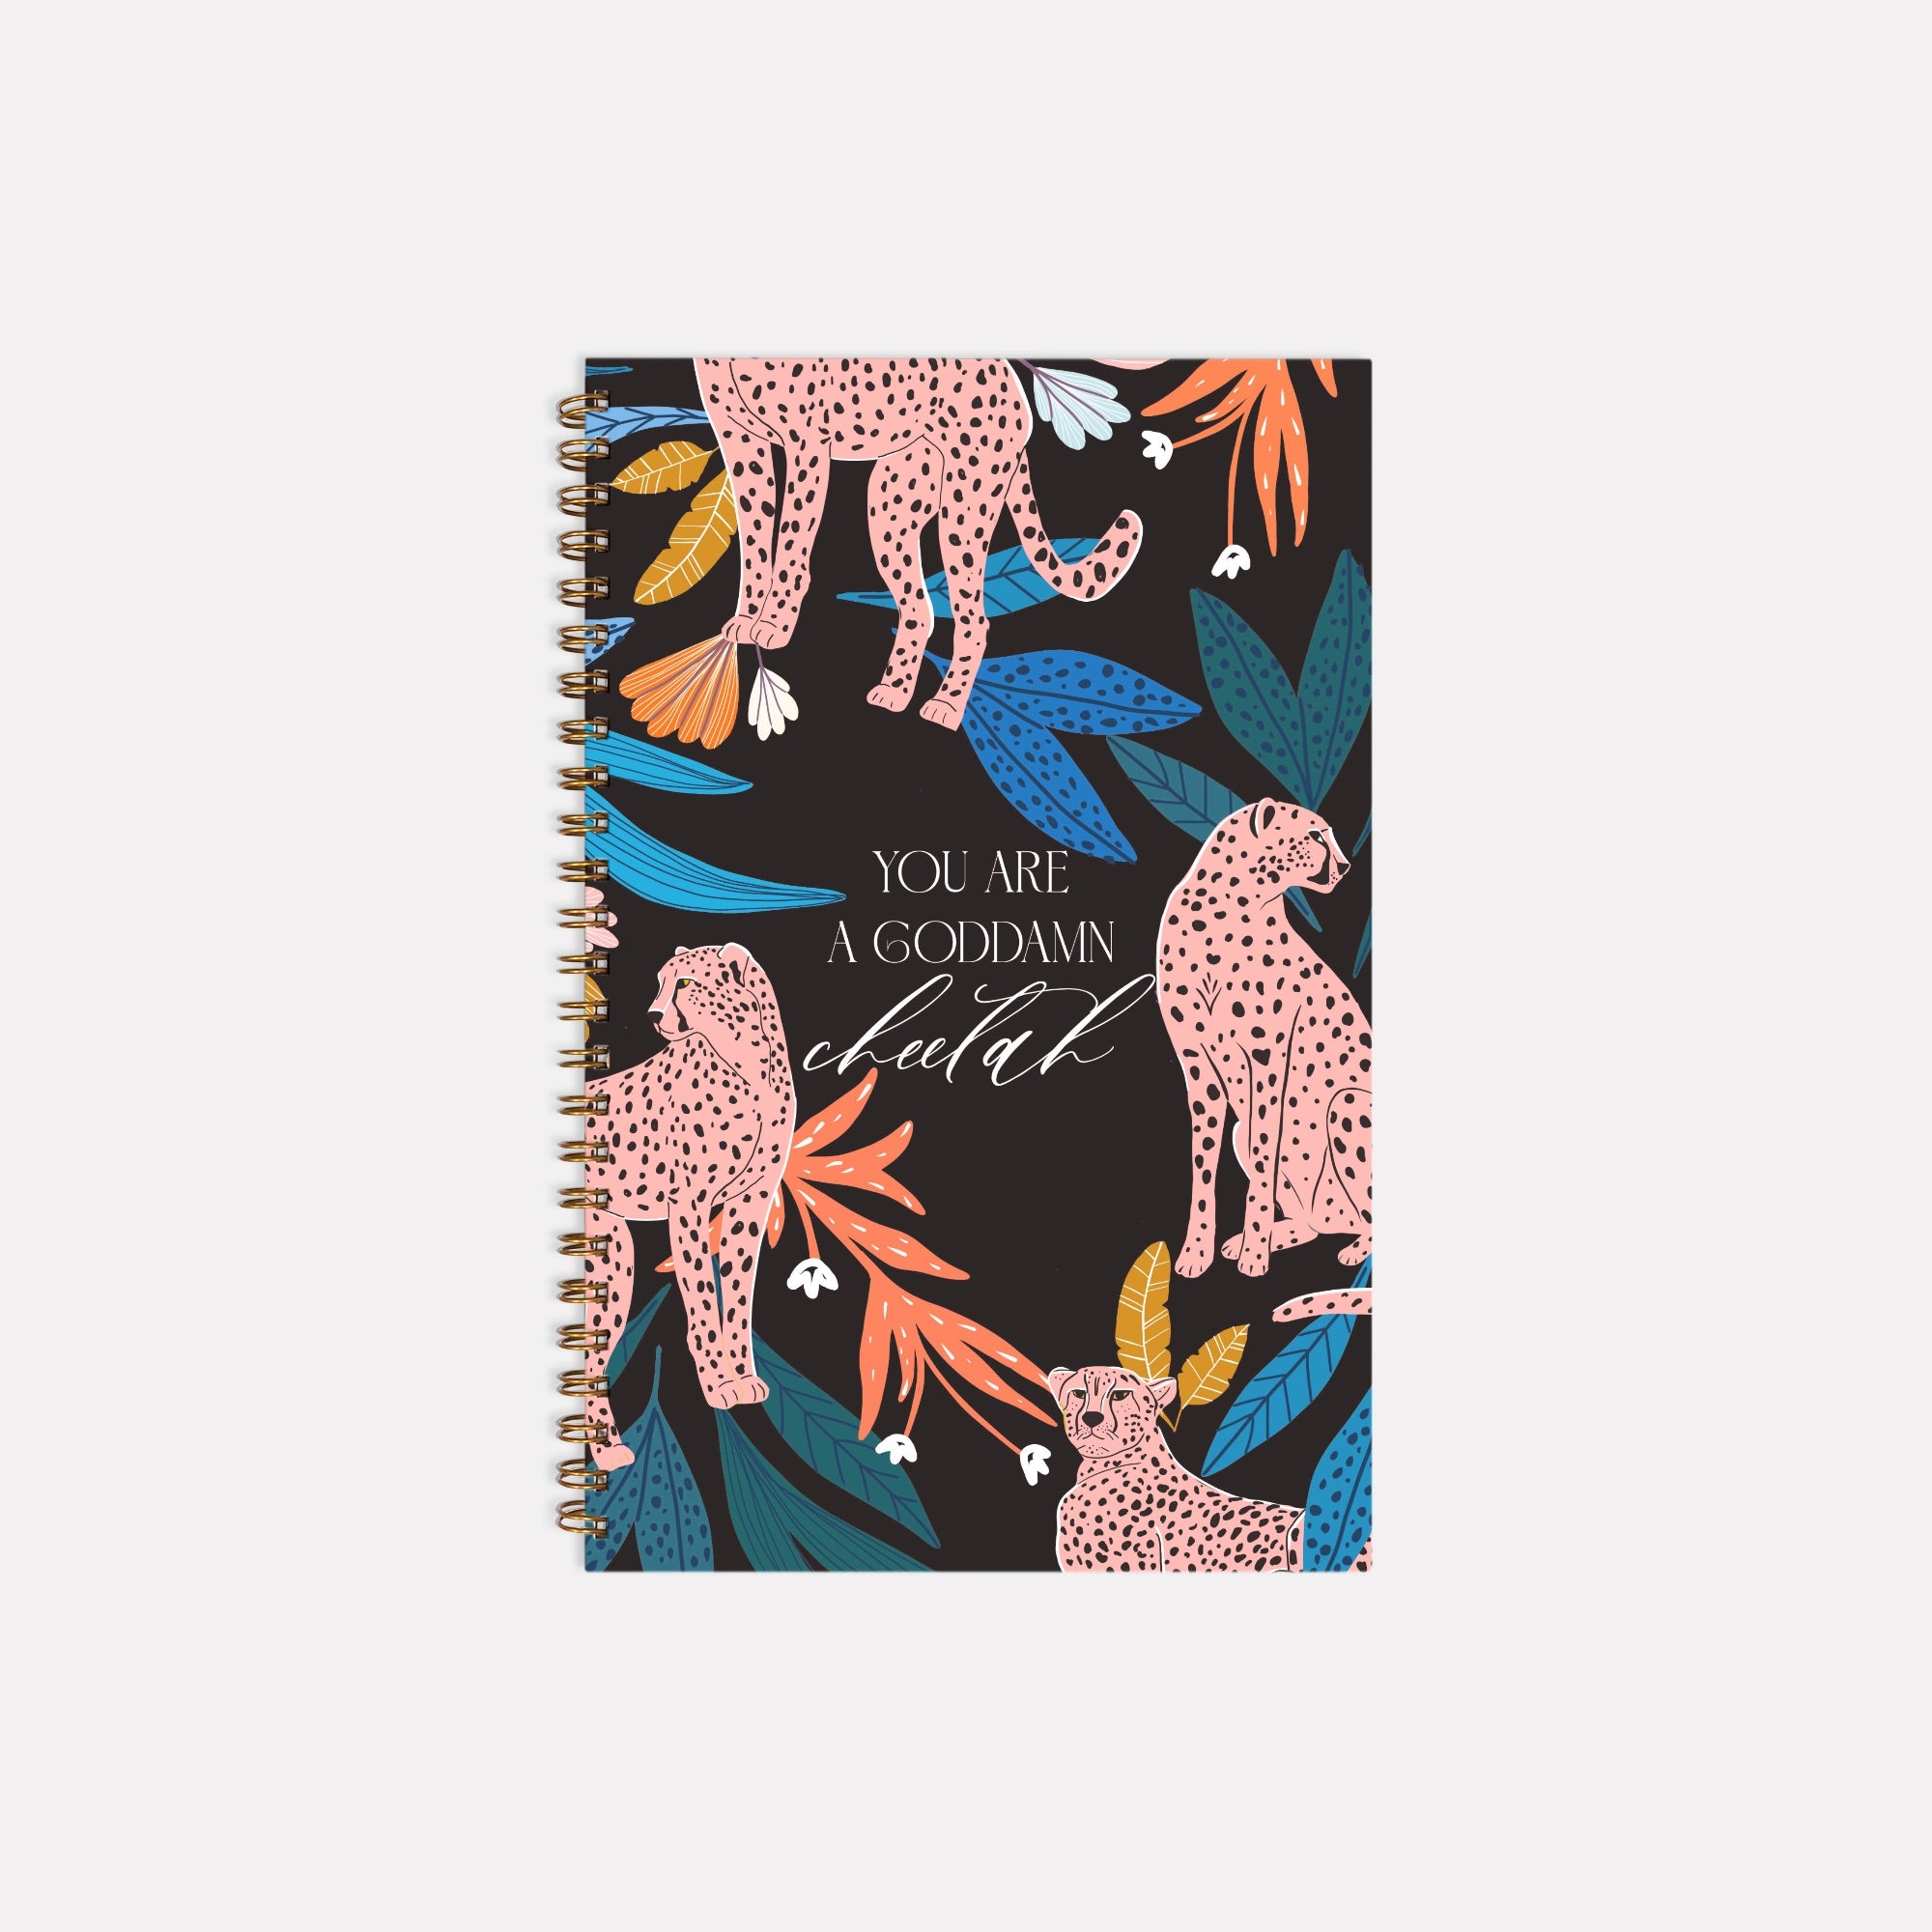 You are a Goddamn Cheetah Notebook Softcover Spiral 5.5 x 8.5